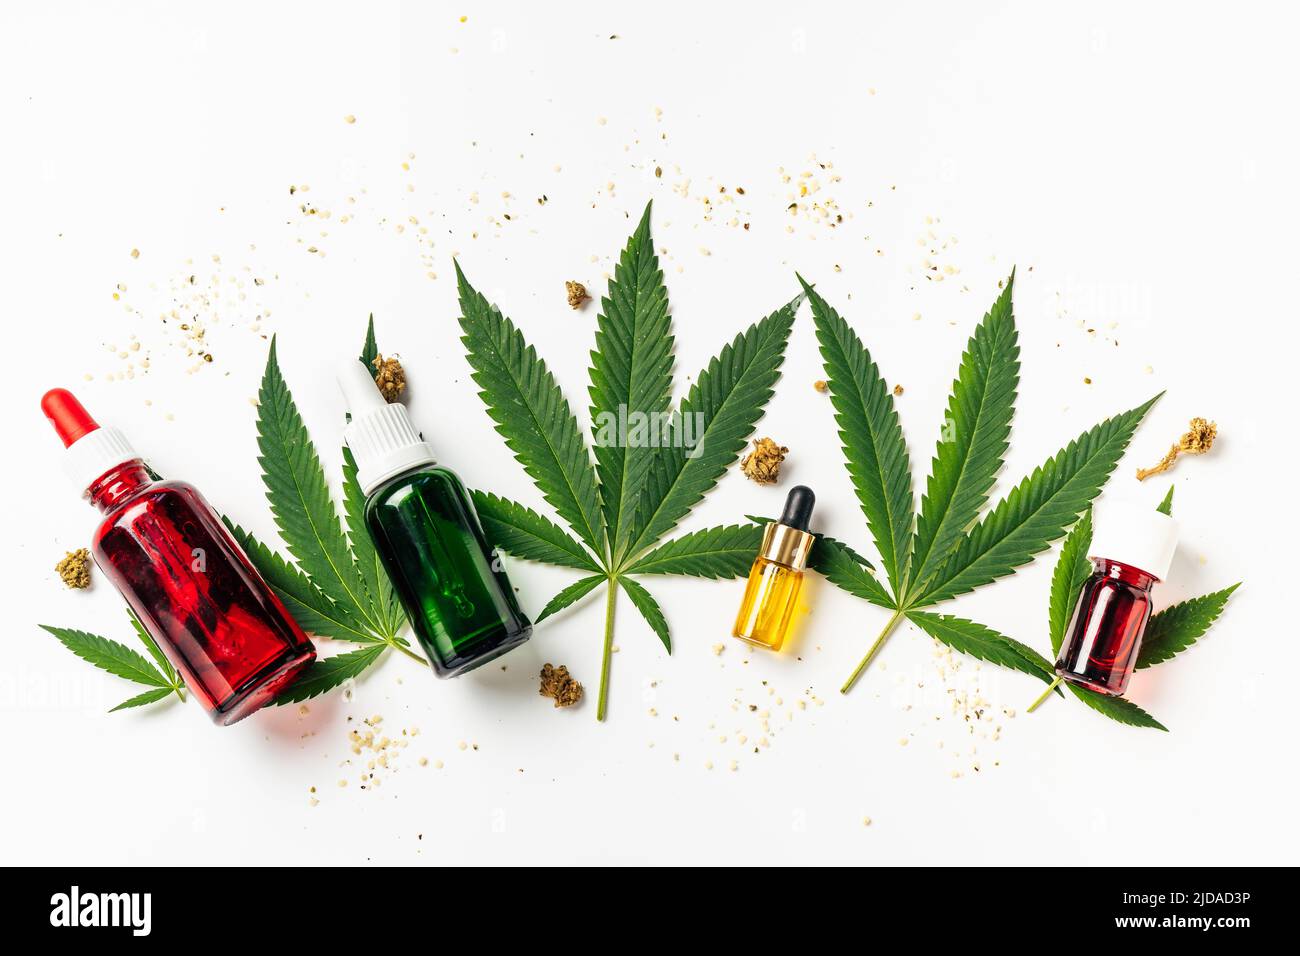 Cannabis oil, hemp leaves, dry flowers and seeds on white background. Natural cosmetics. Increasingly legal and medical use of marijuana Stock Photo